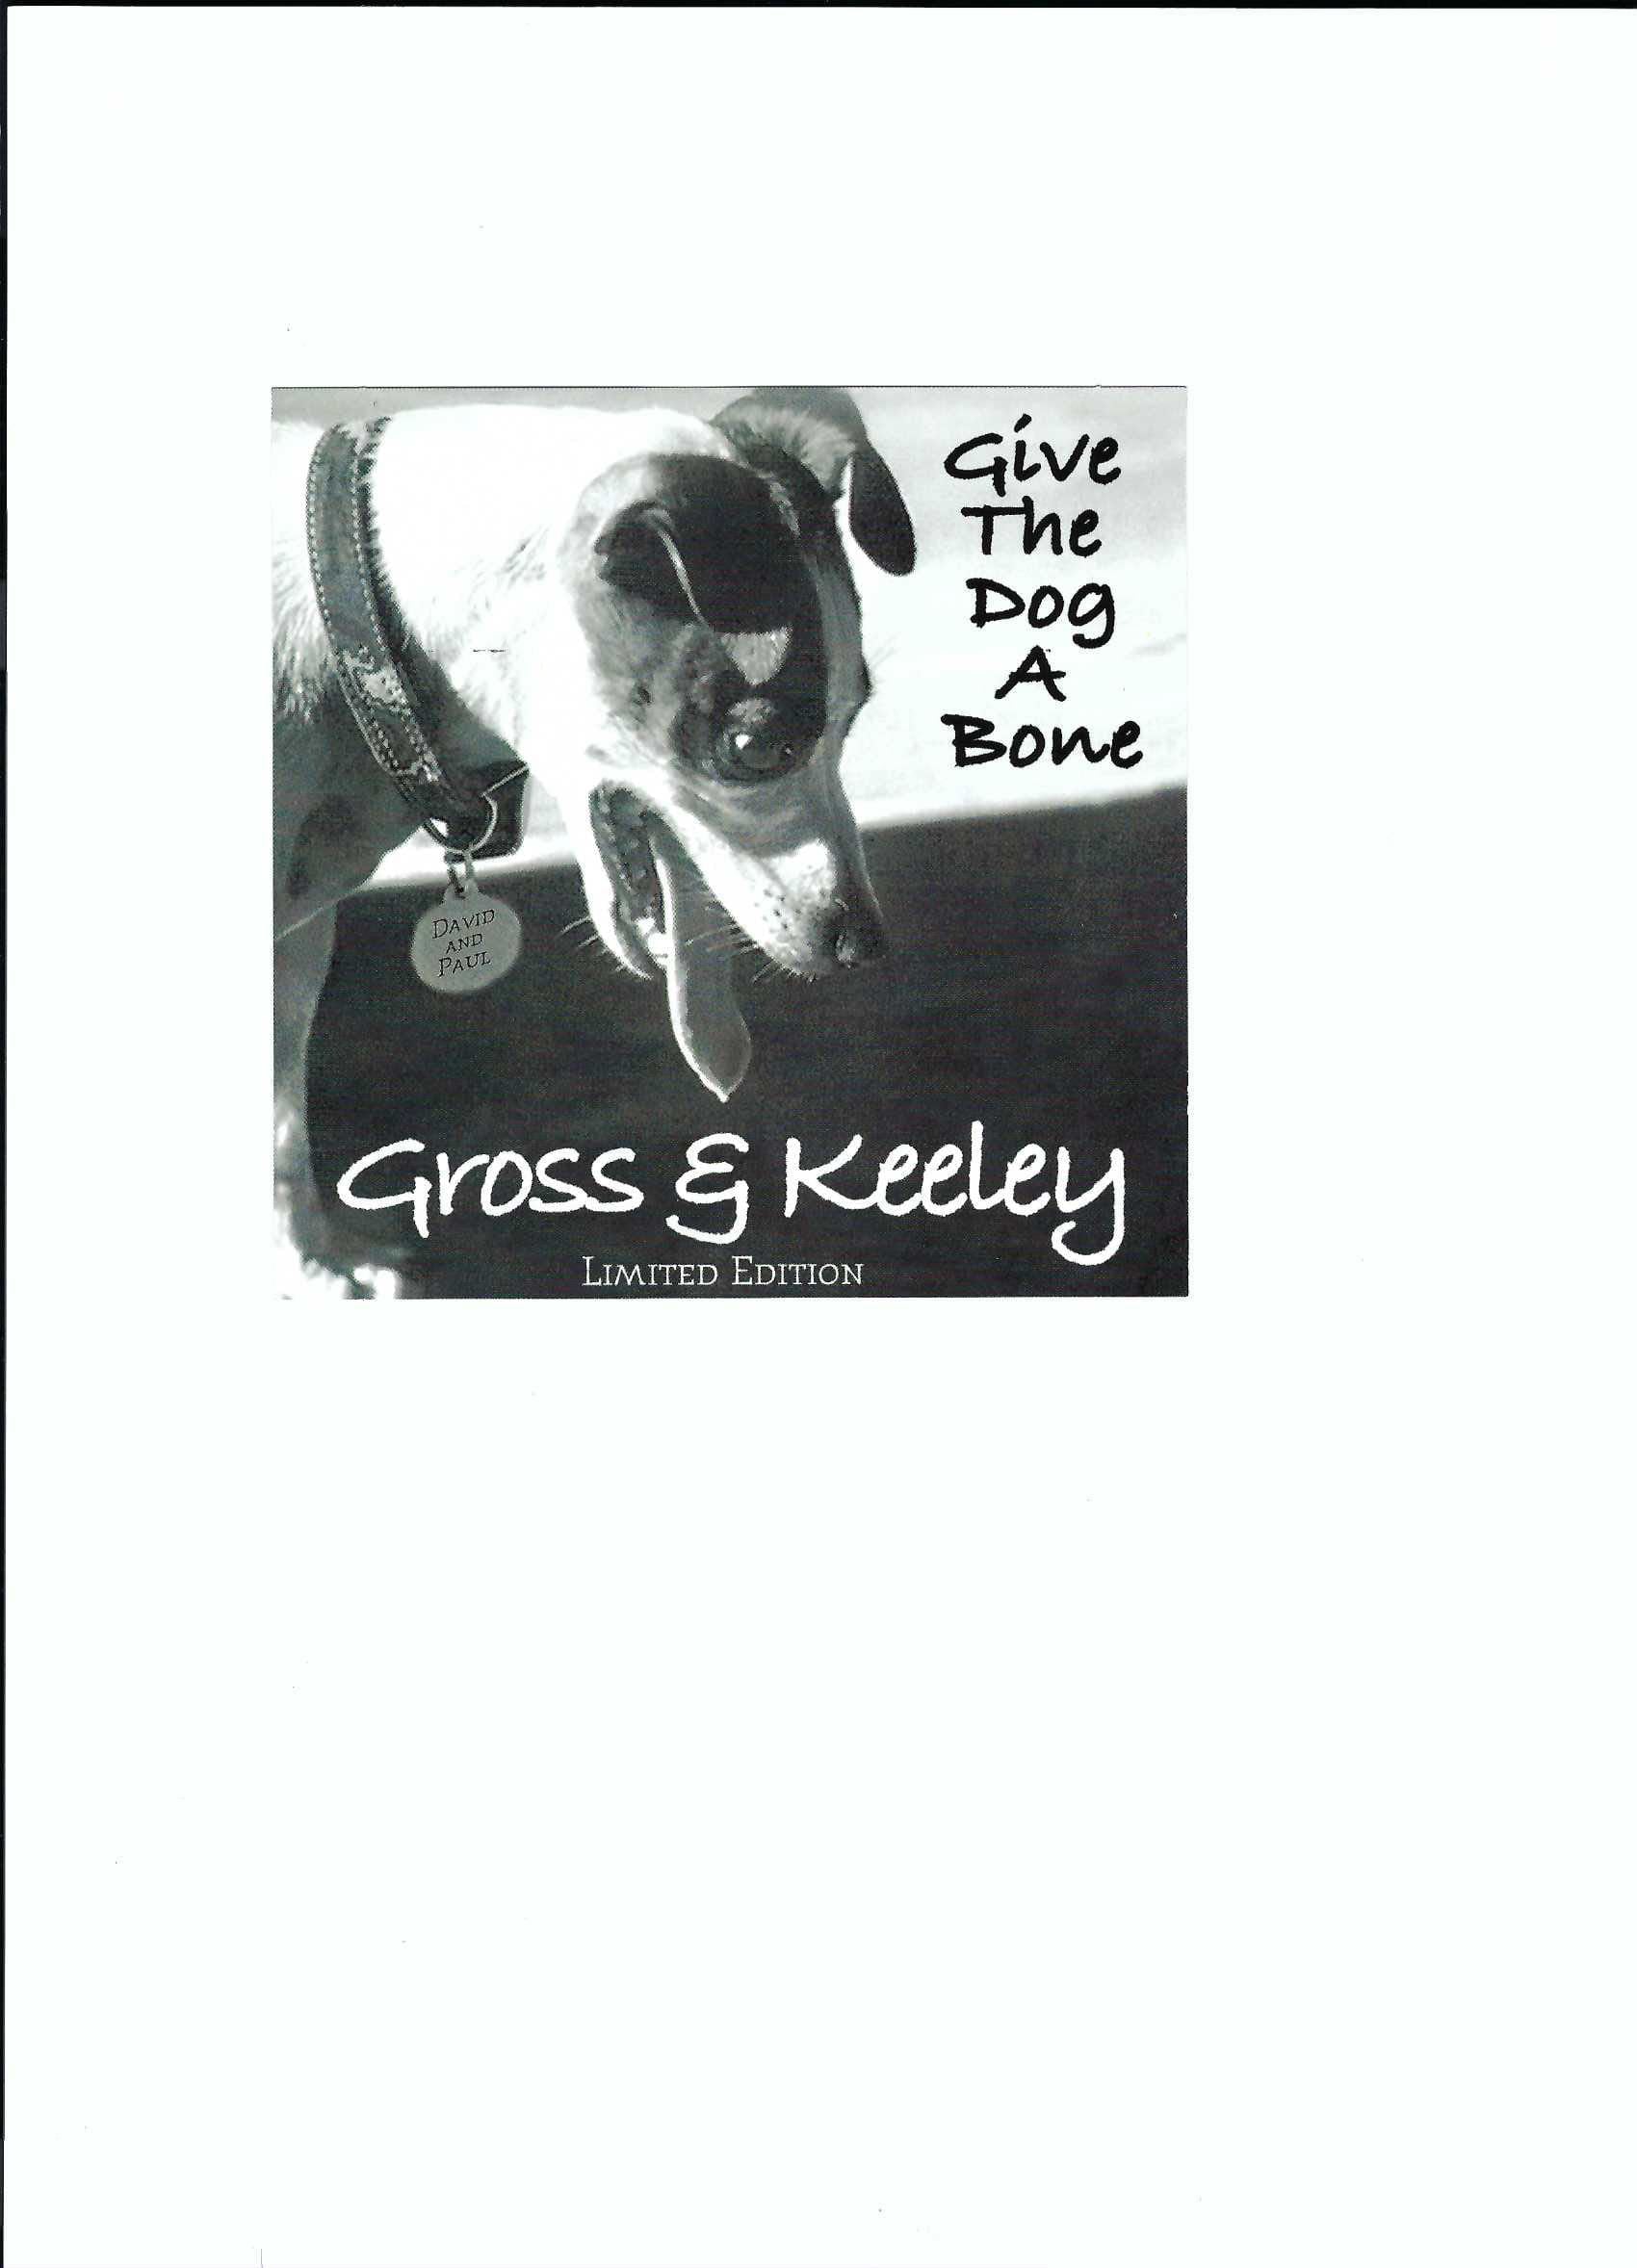 Give the Dog a Bone by Gross and Keeley